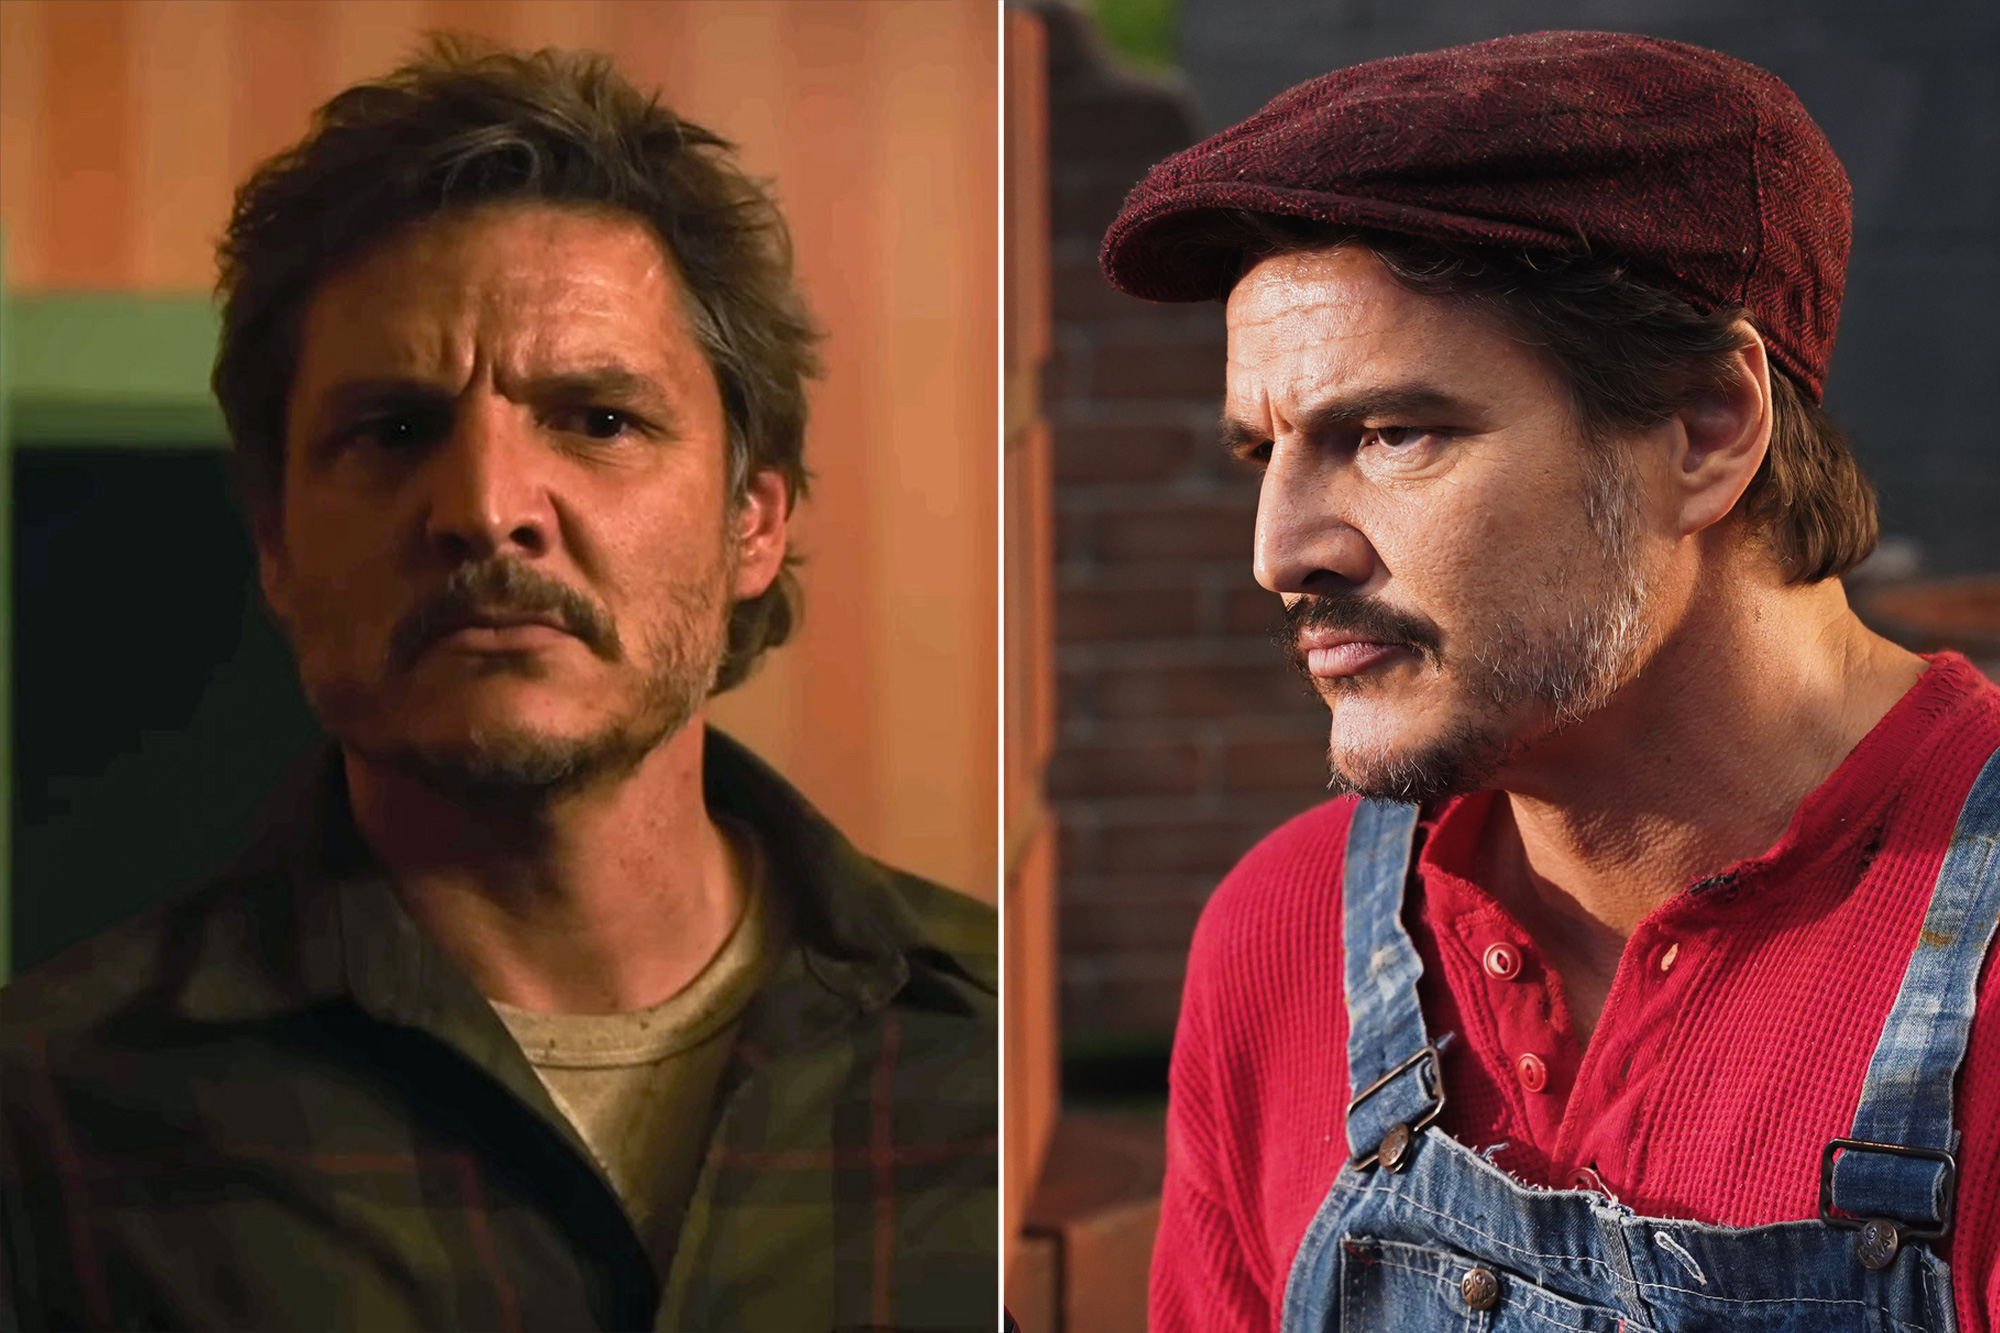 Pedro Pascal in 'The Last of Us' and 'Saturday Night Live,' respectively